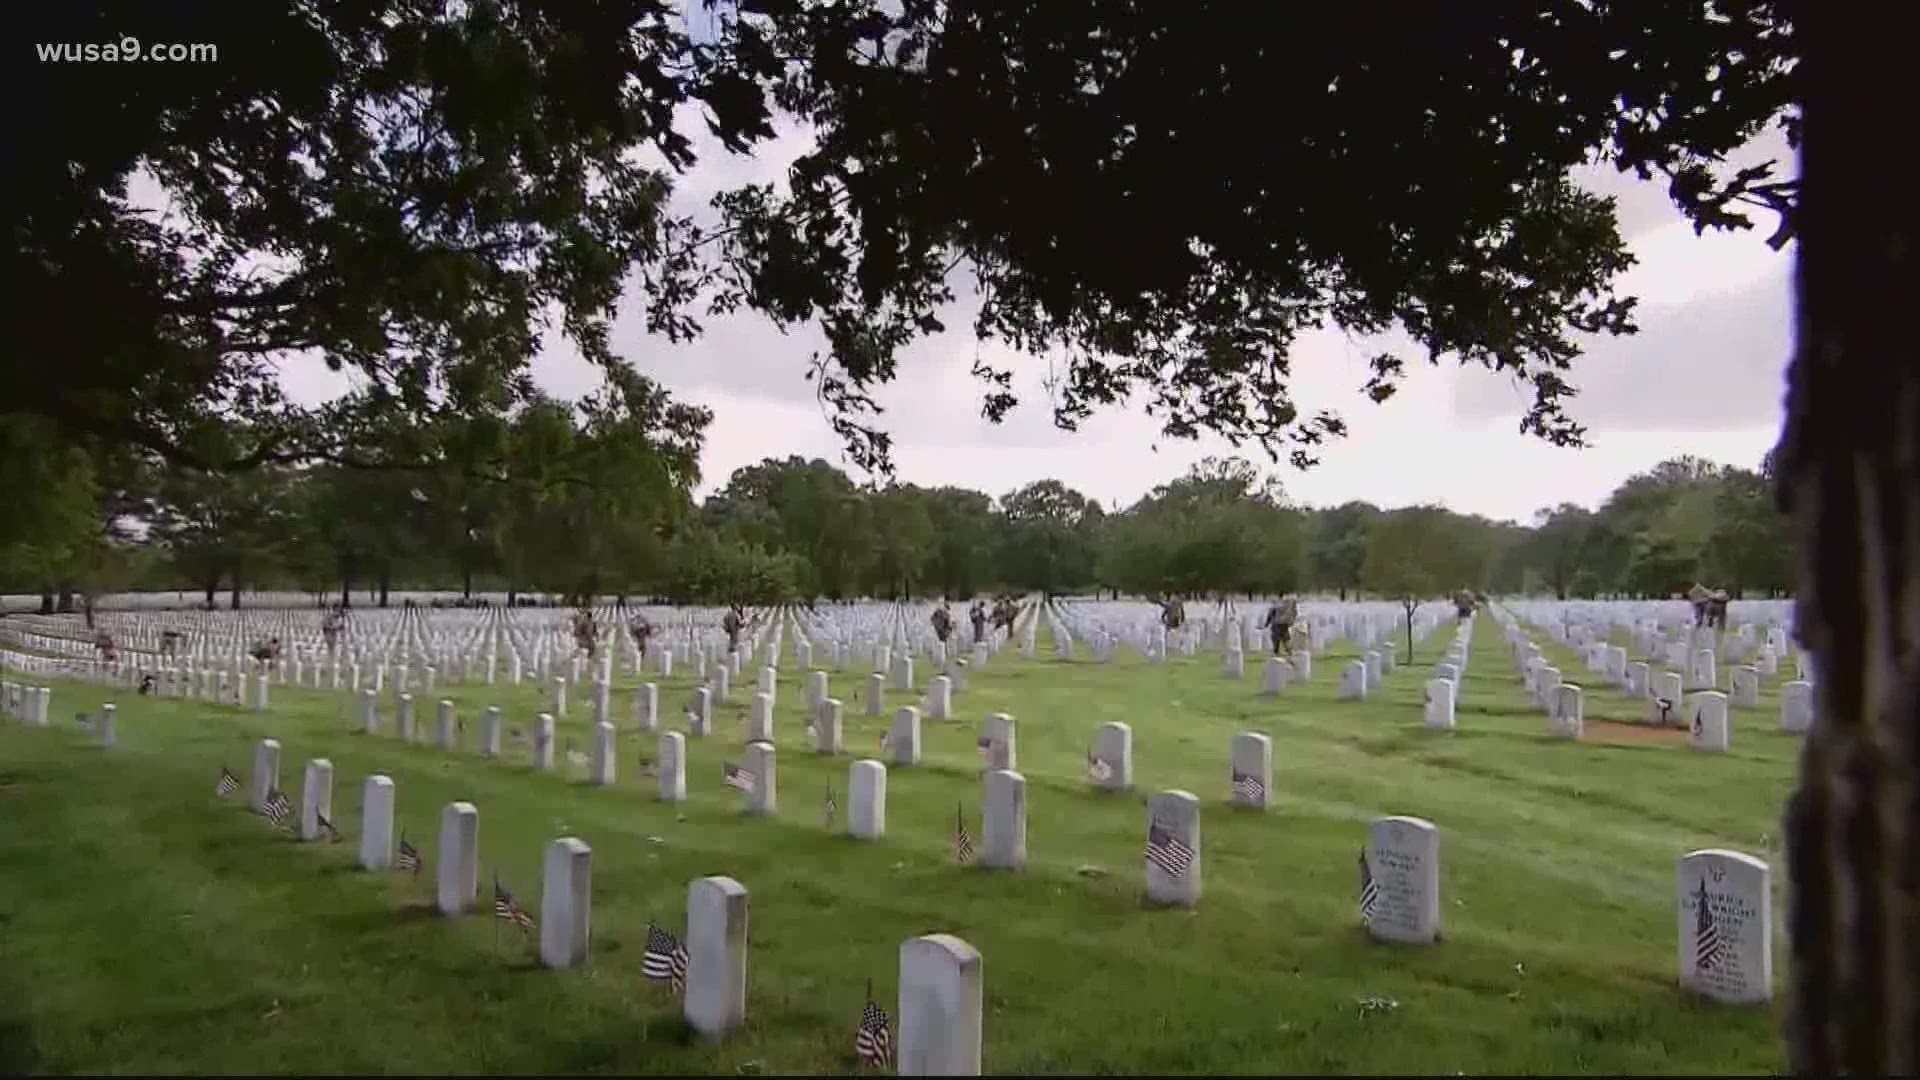 Memorial Day traditions at Arlington National Cemetery look very different this year.